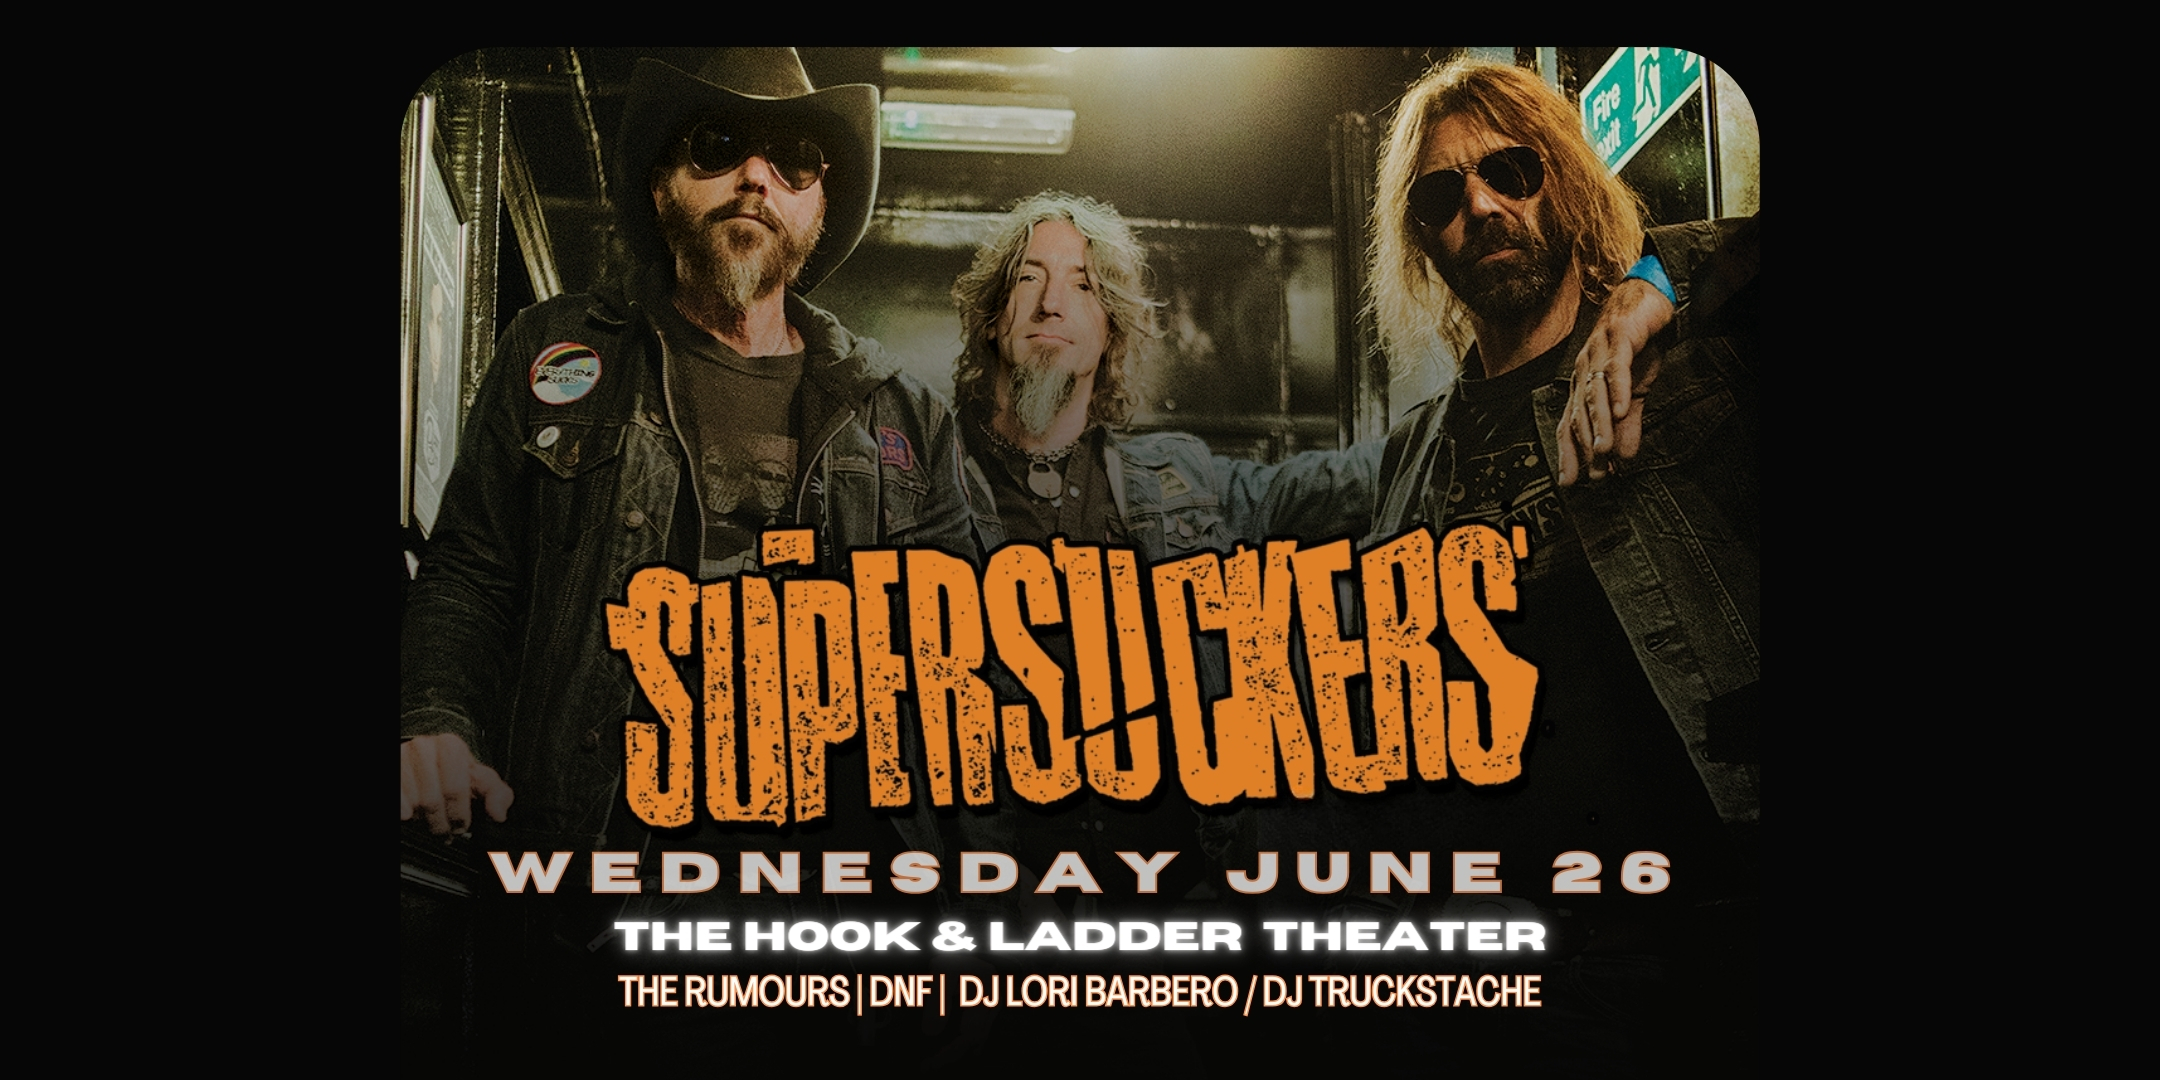 Supersuckers with The Rumours, & DNF + DJ Lori Barbero / DJ Truckstache Spinning Vinyl Wednesday, June 26 The Hook and Ladder Theater Doors 7:00pm :: Music 7:00pm :: 21+ $20 ADV / $25 DOS General Admission * Does not include fees